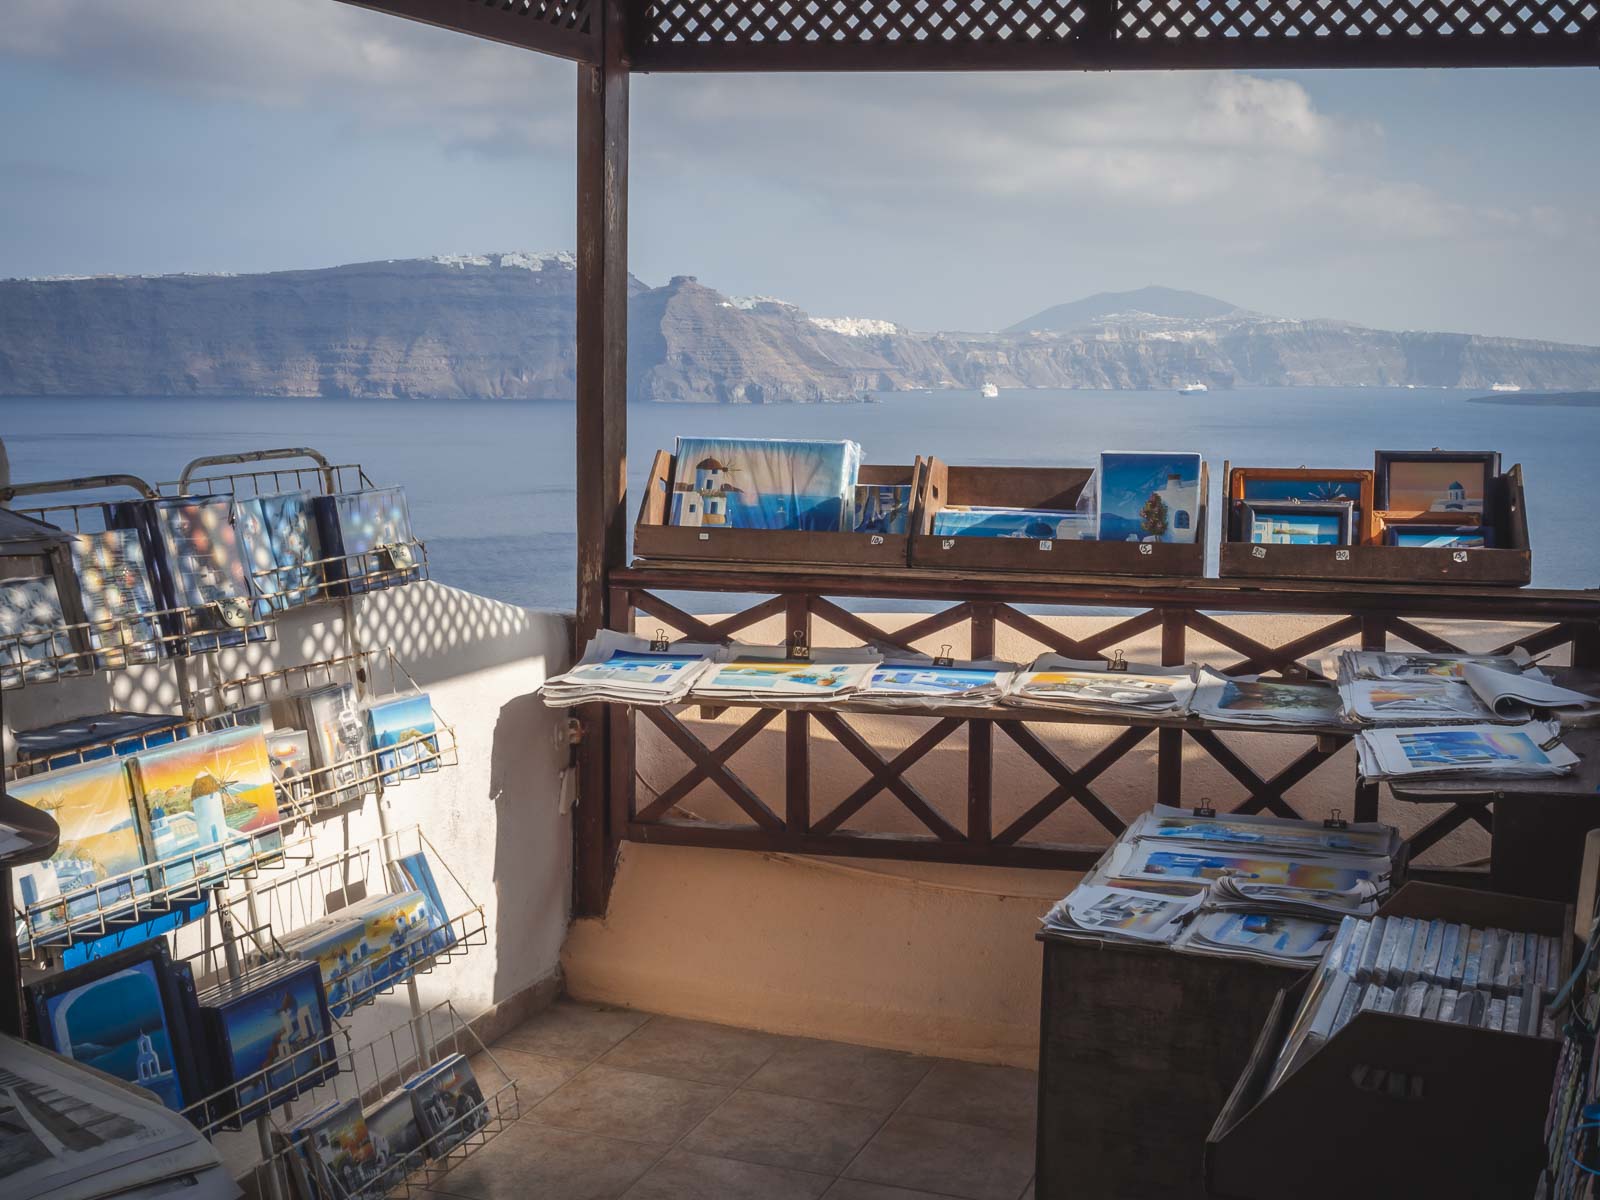 Shopping in the streets of Fira